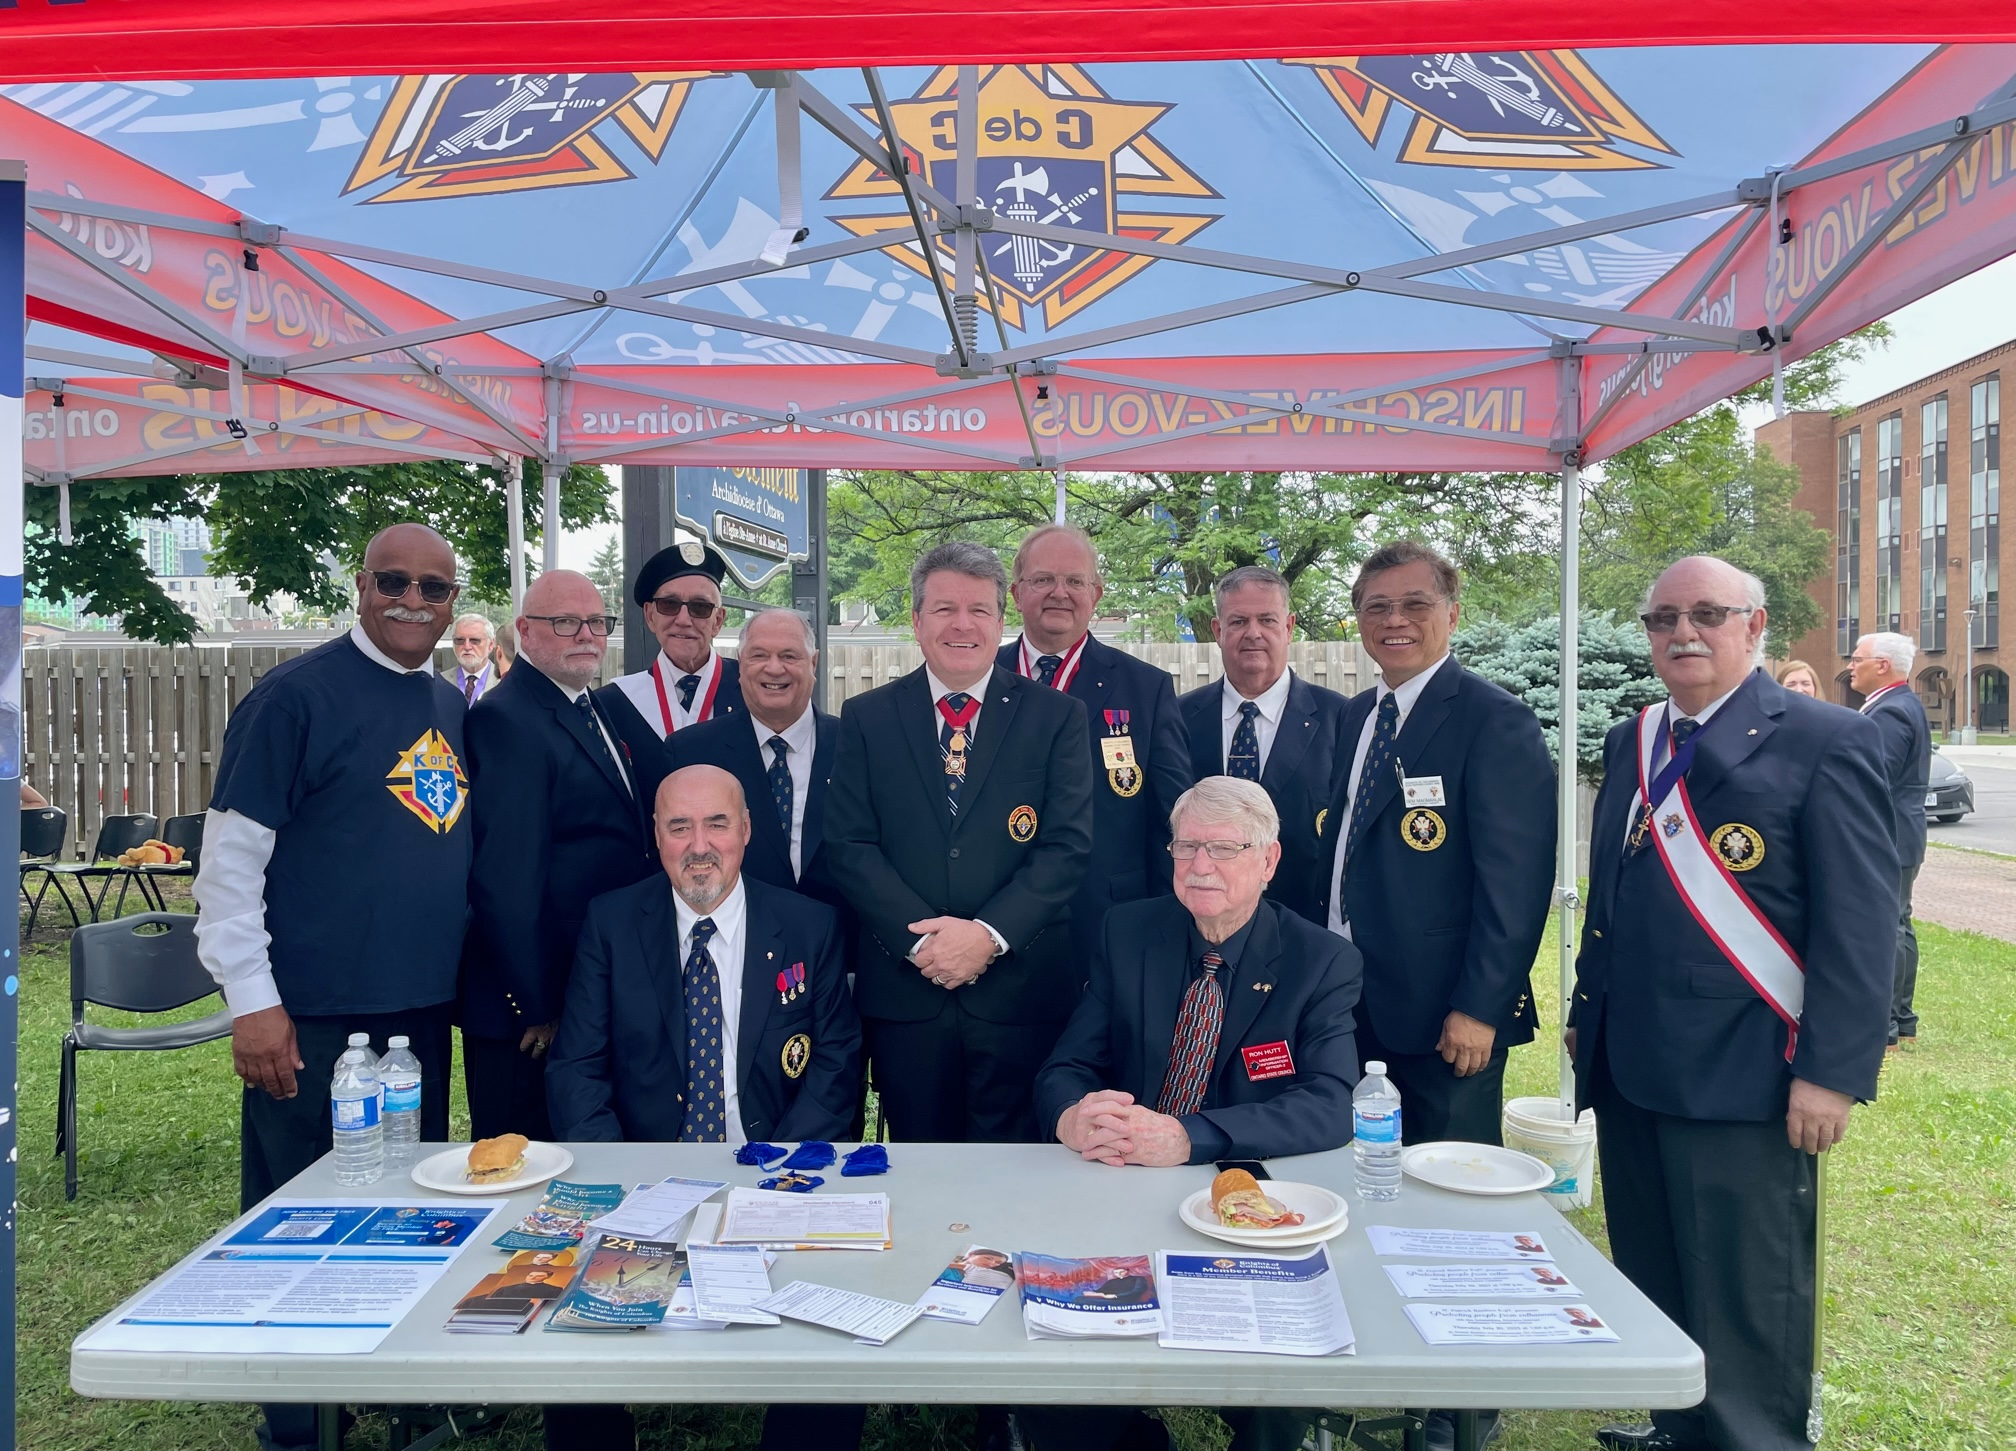 KofC Recruiting Event at St. Clements Parish, Ontario